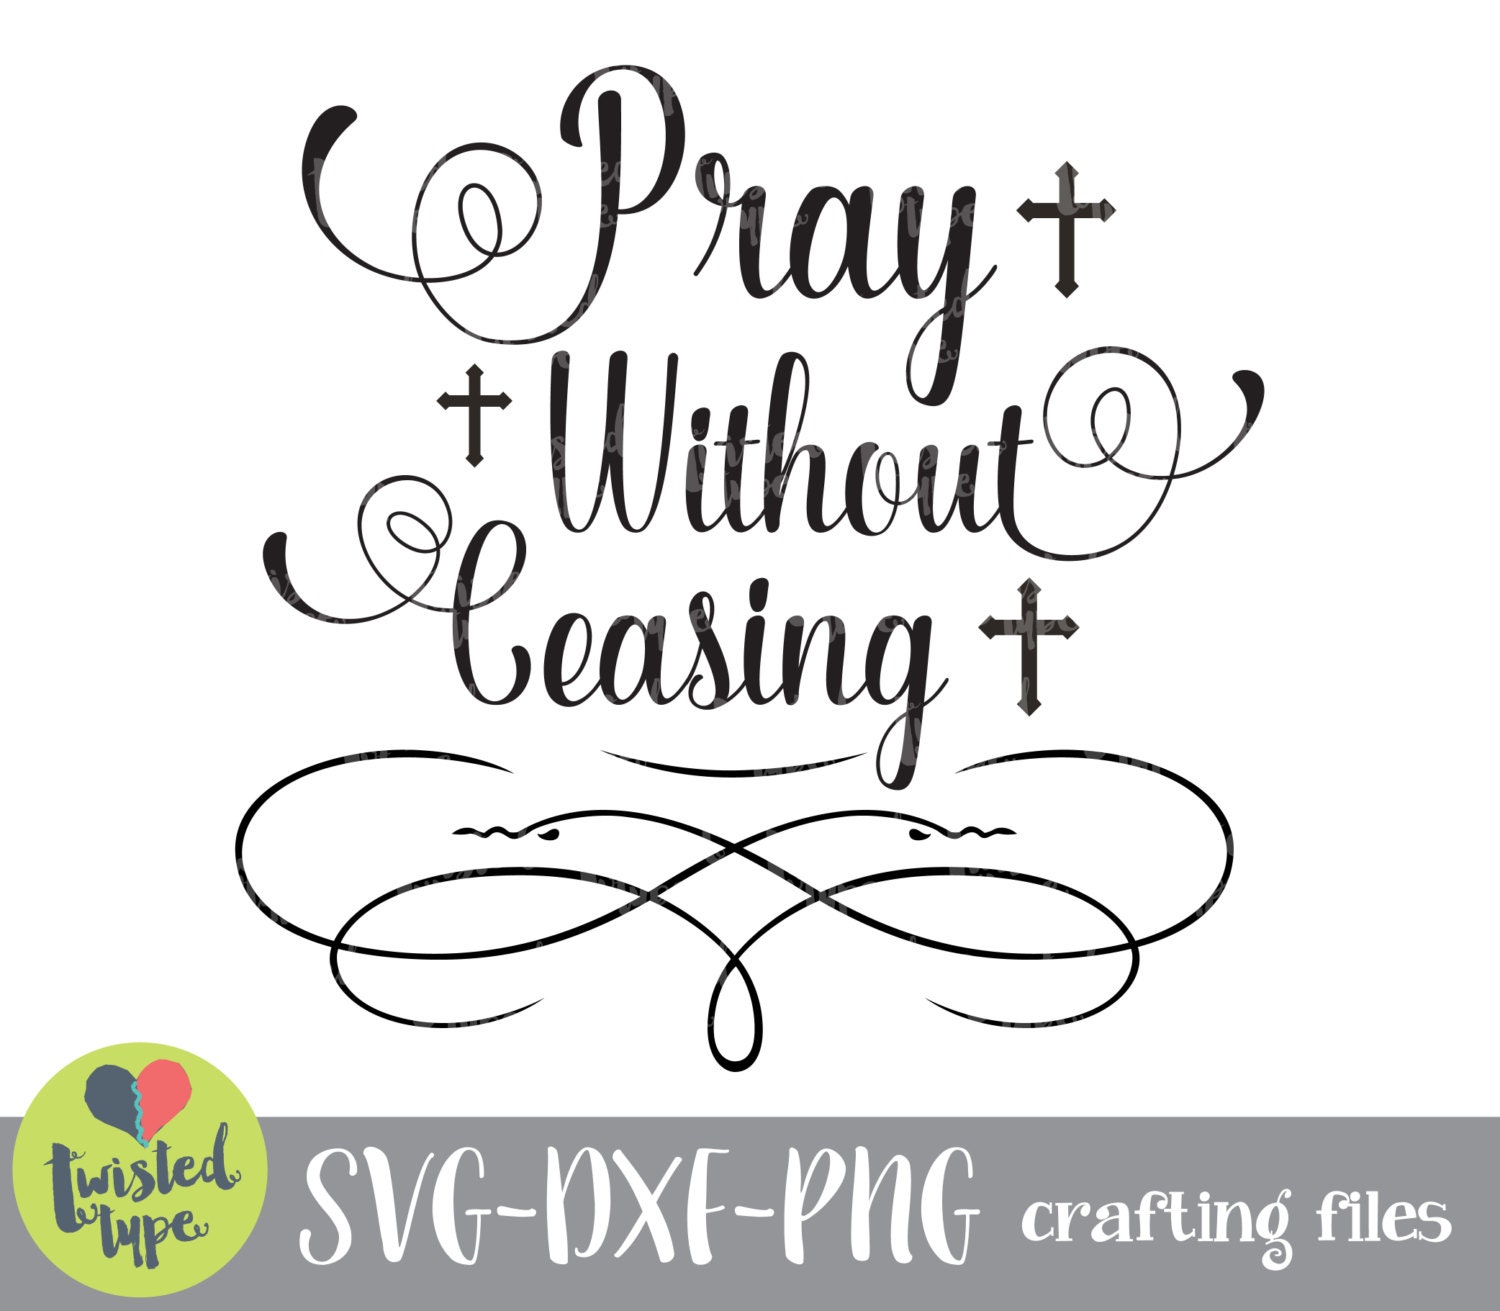 Download Christian SVG CUTTING FILE Pray Without Ceasing Diy